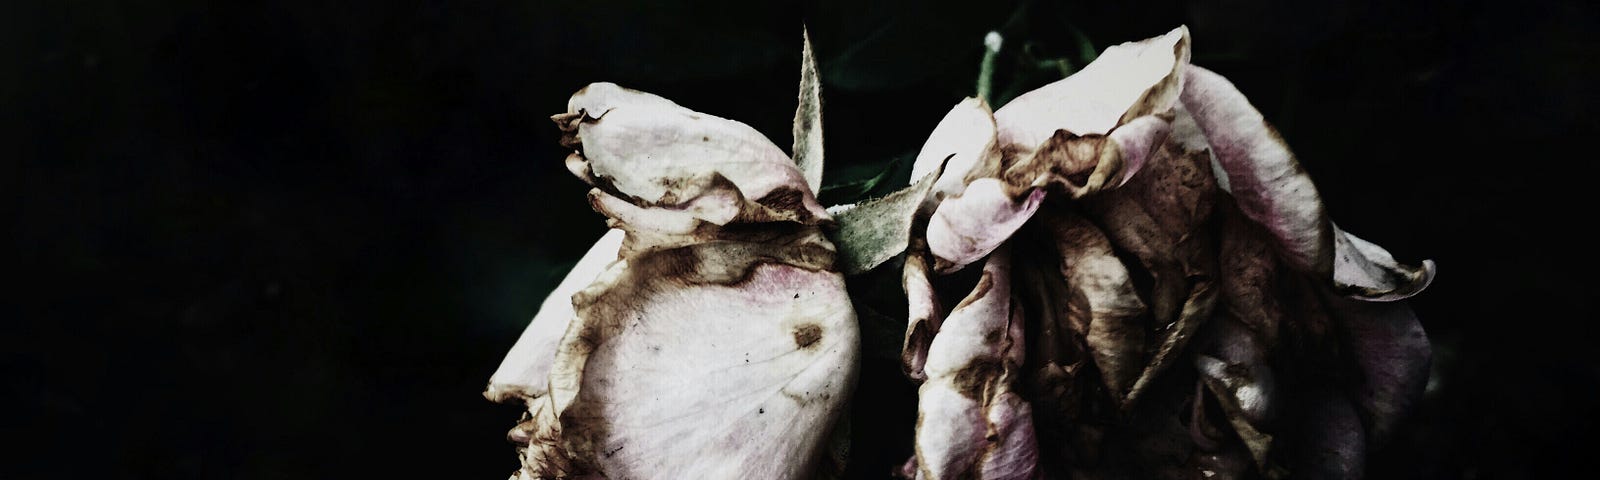 Flowers decaying